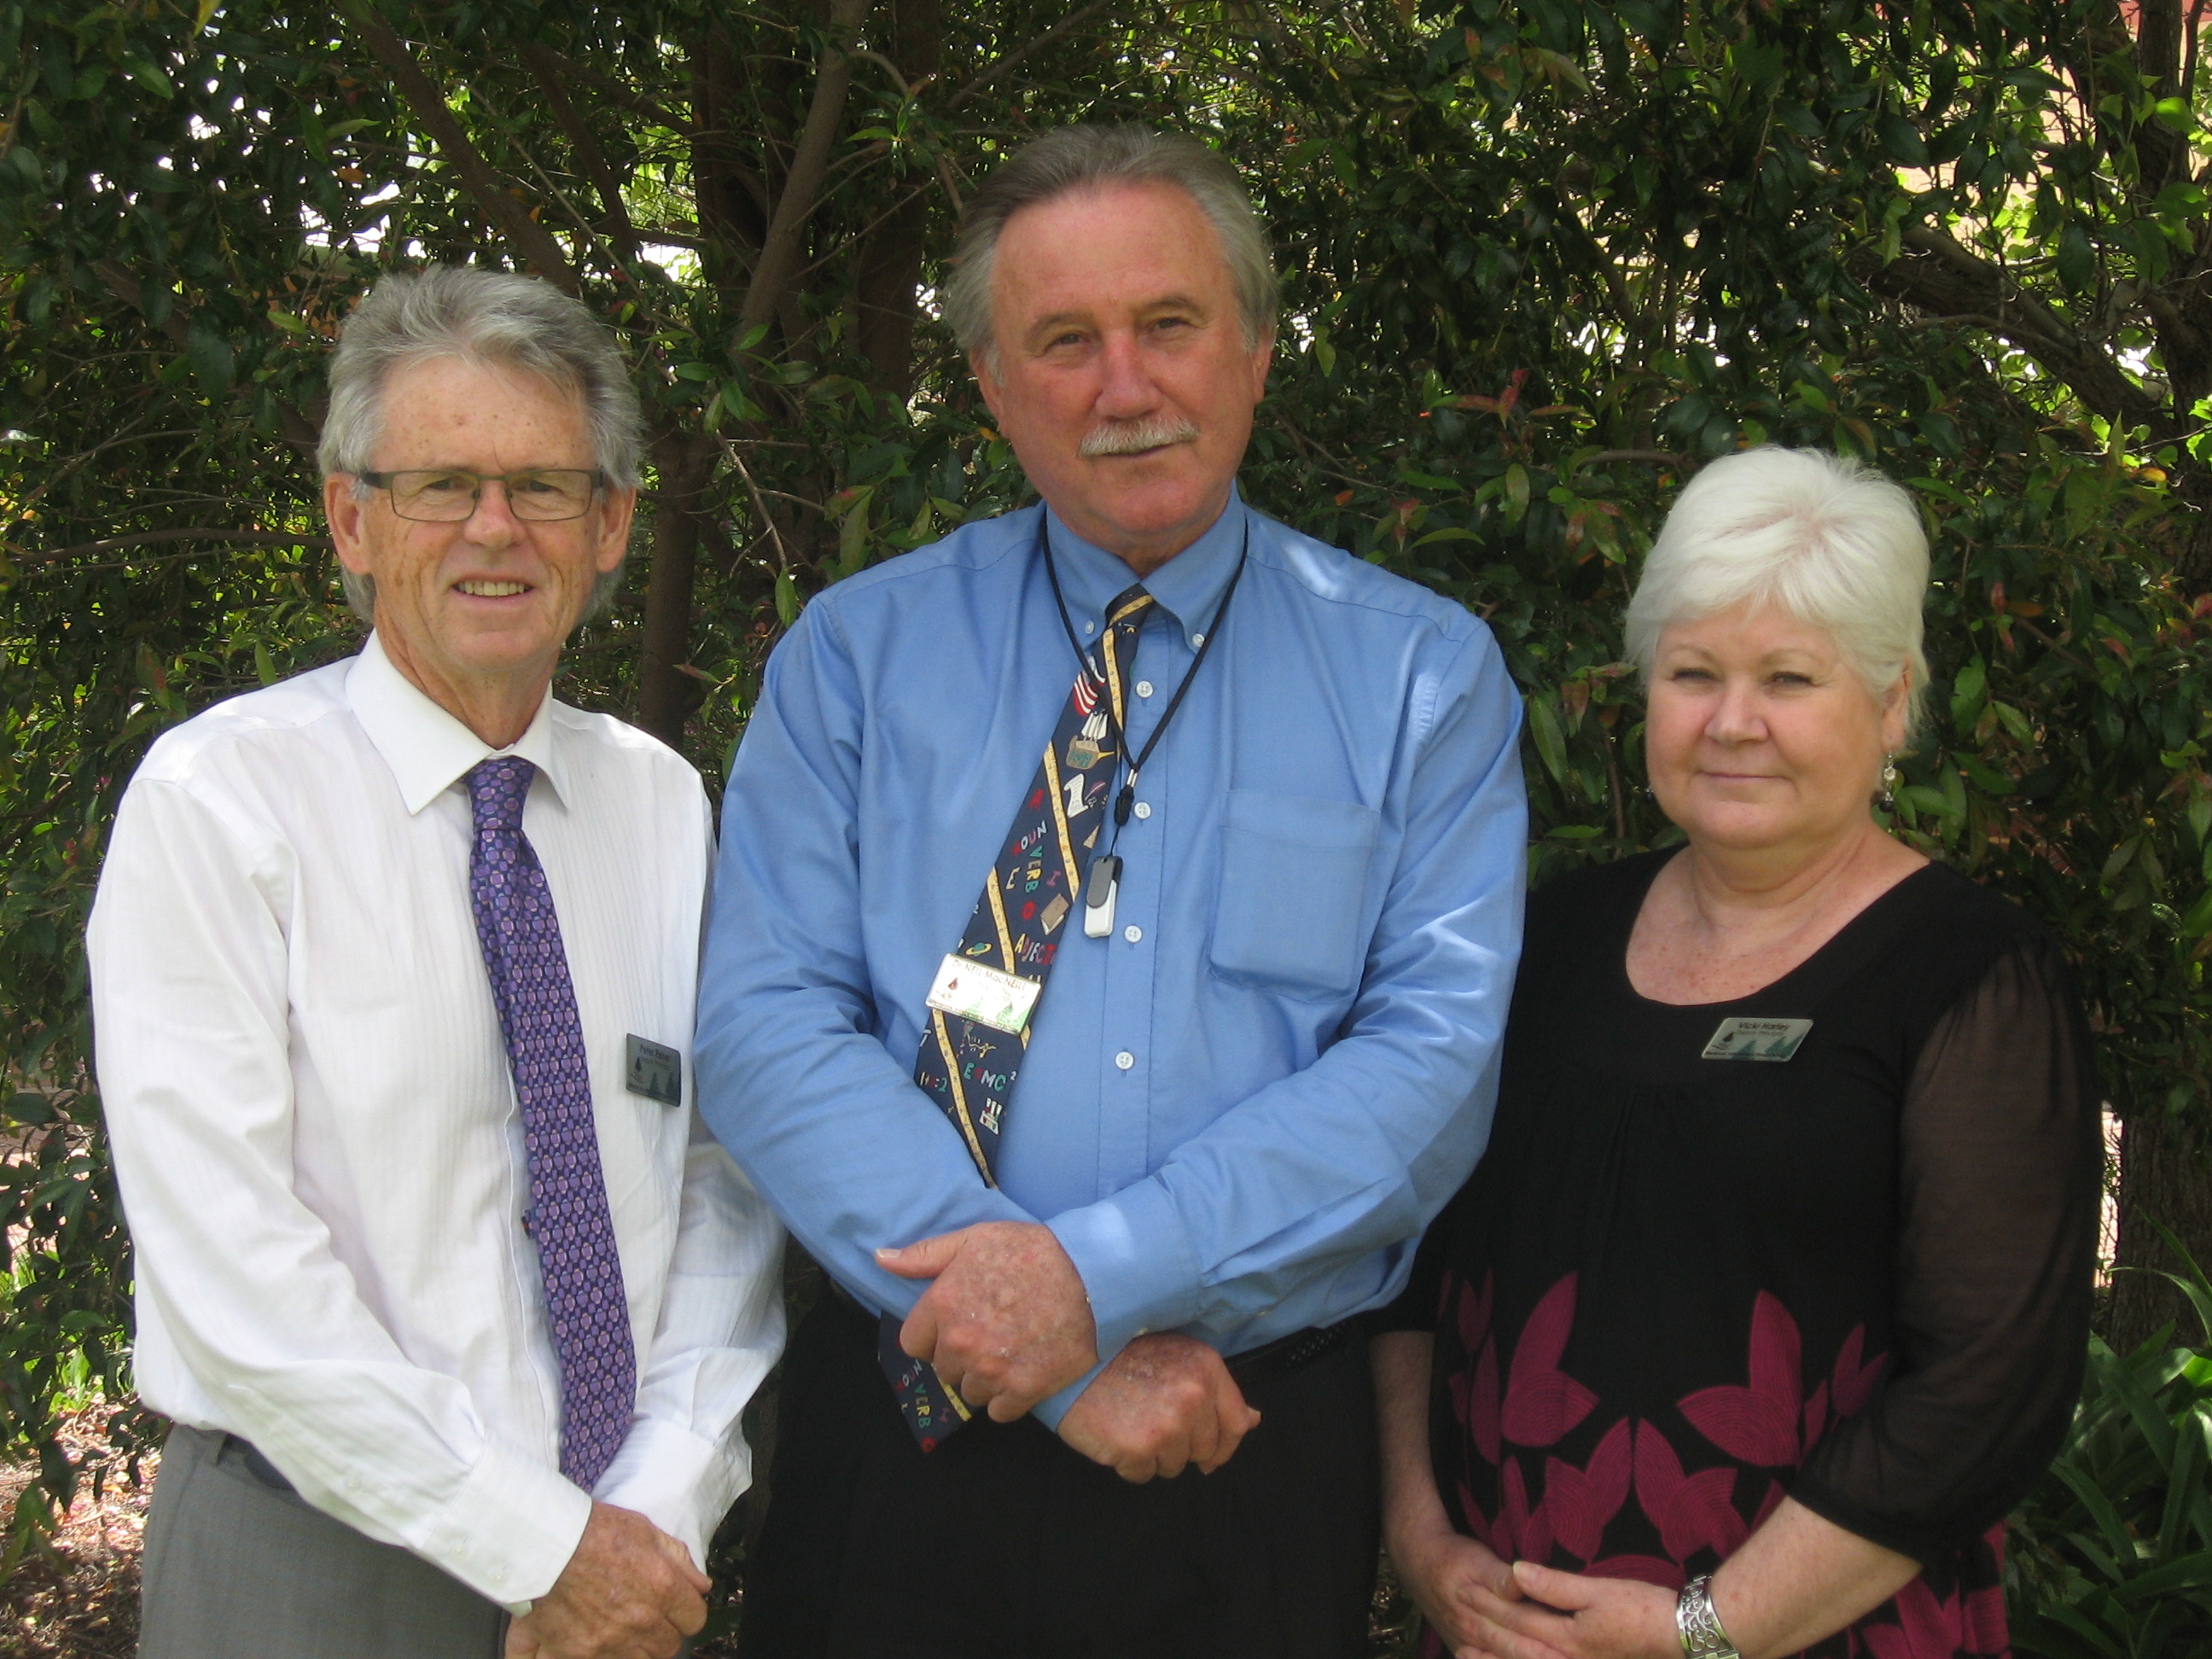 Ellenbrook Primary's Peter Fisher, Neil MacNeill and Vicki Harley.